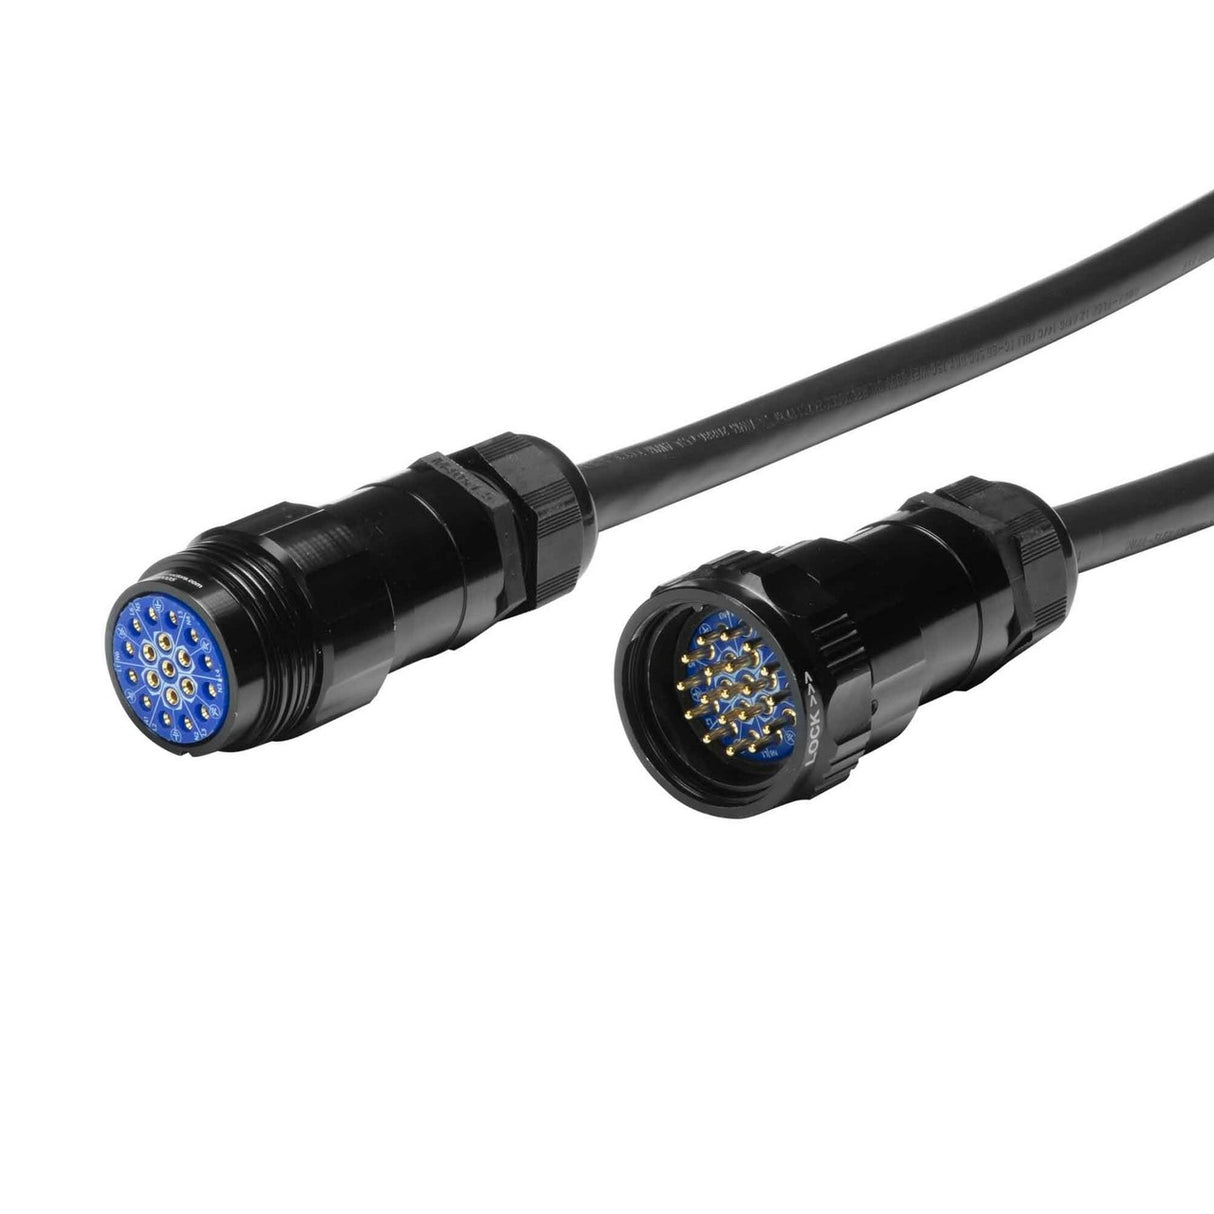 Elite Core 19 Pin Soco Extension Male to Female Lighting Power Cable with Standard Connector, 10 Foot